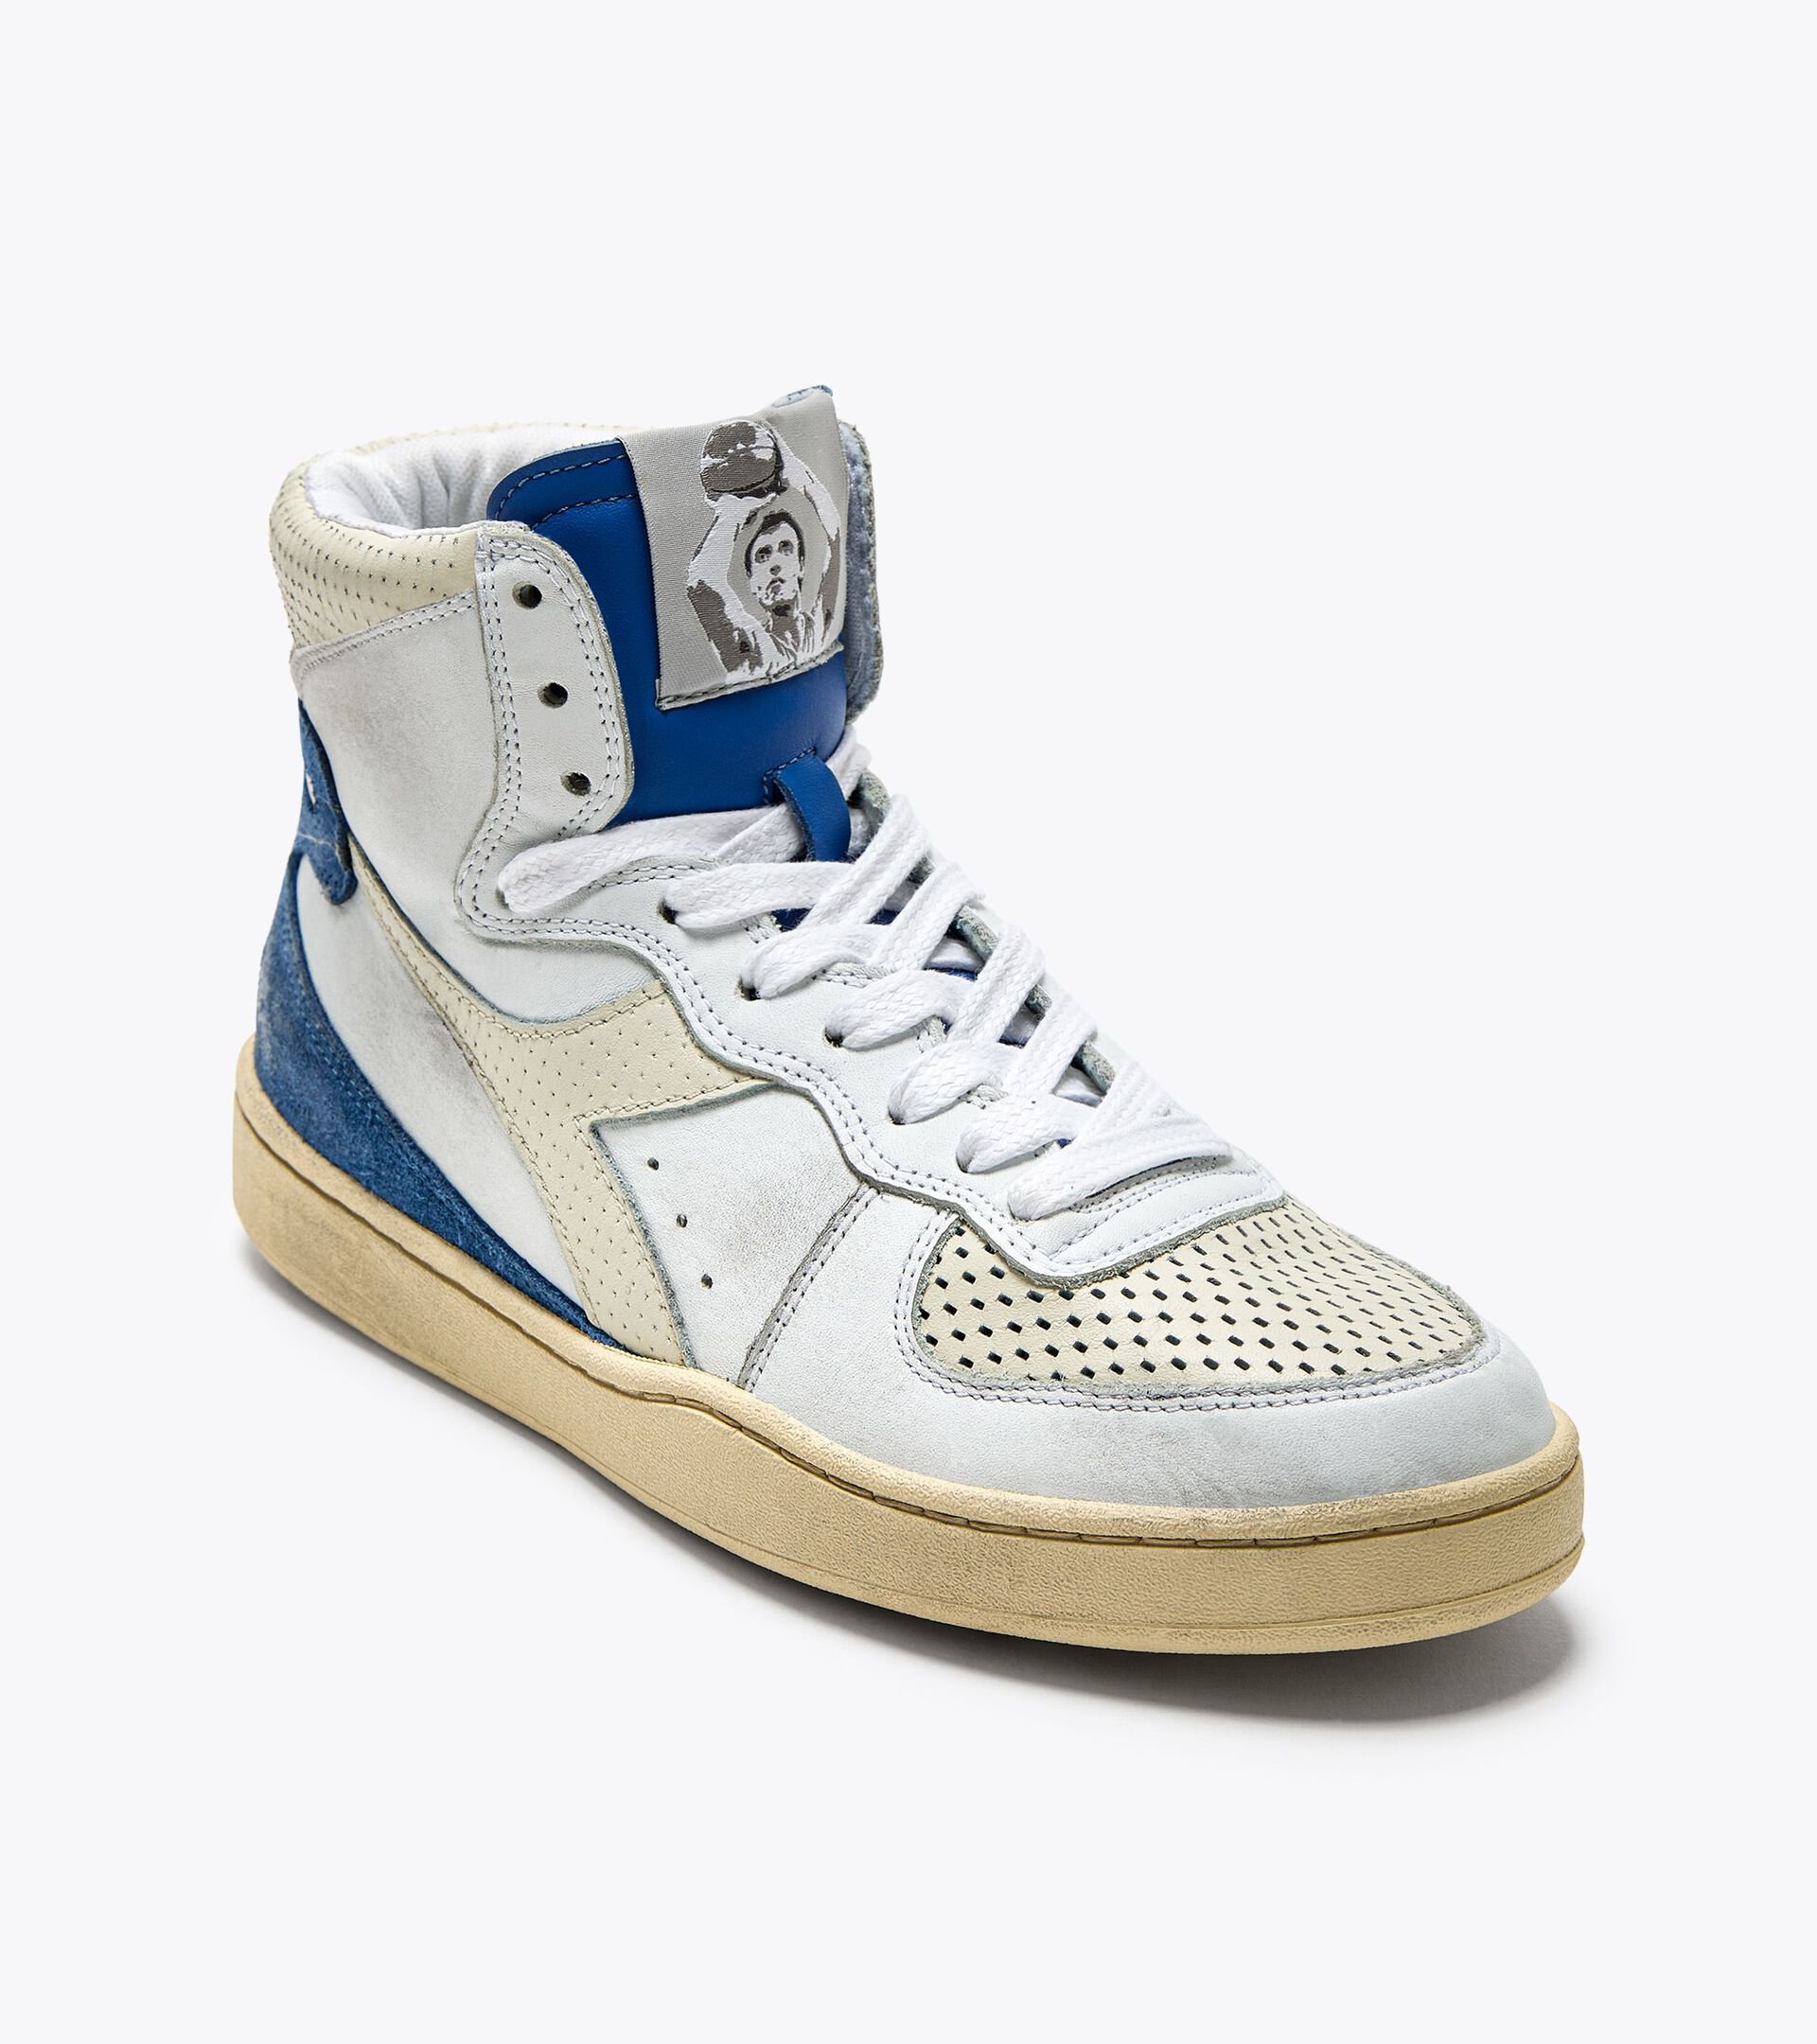 Heritage shoe - Made In Italy - Gender Neutral MI BASKET PUNCHED ITA X DINO MENEGHIN WHITE/DELFT - Diadora